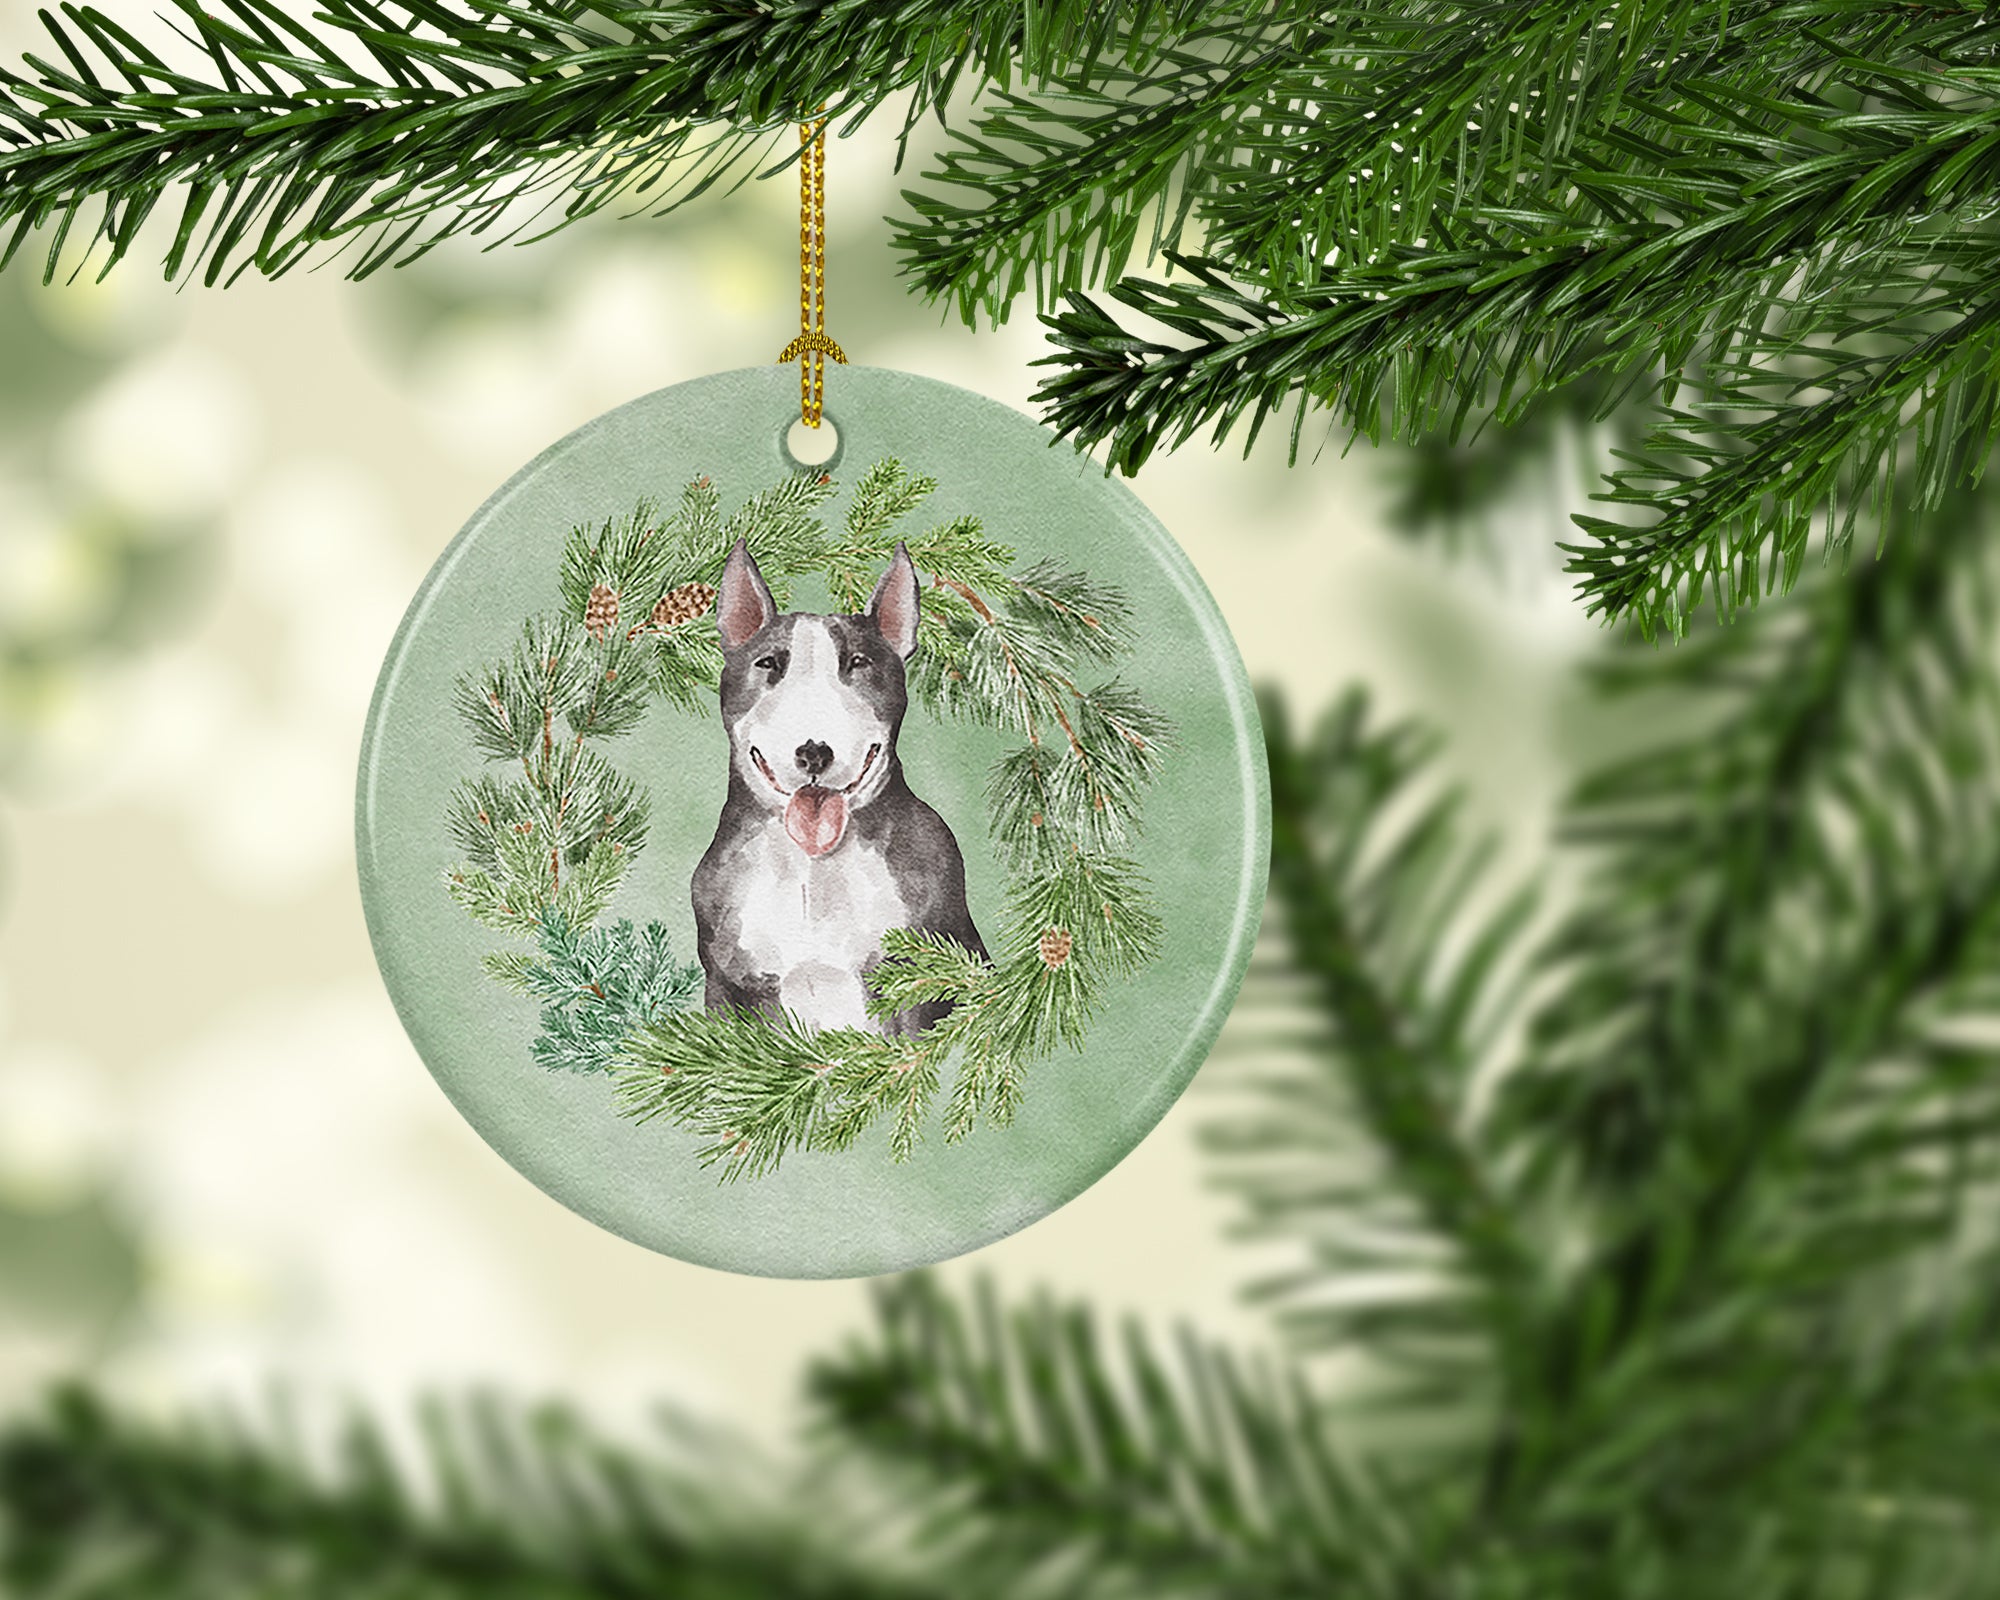 Buy this Bull Terrier Black and White Christmas Wreath Ceramic Ornament